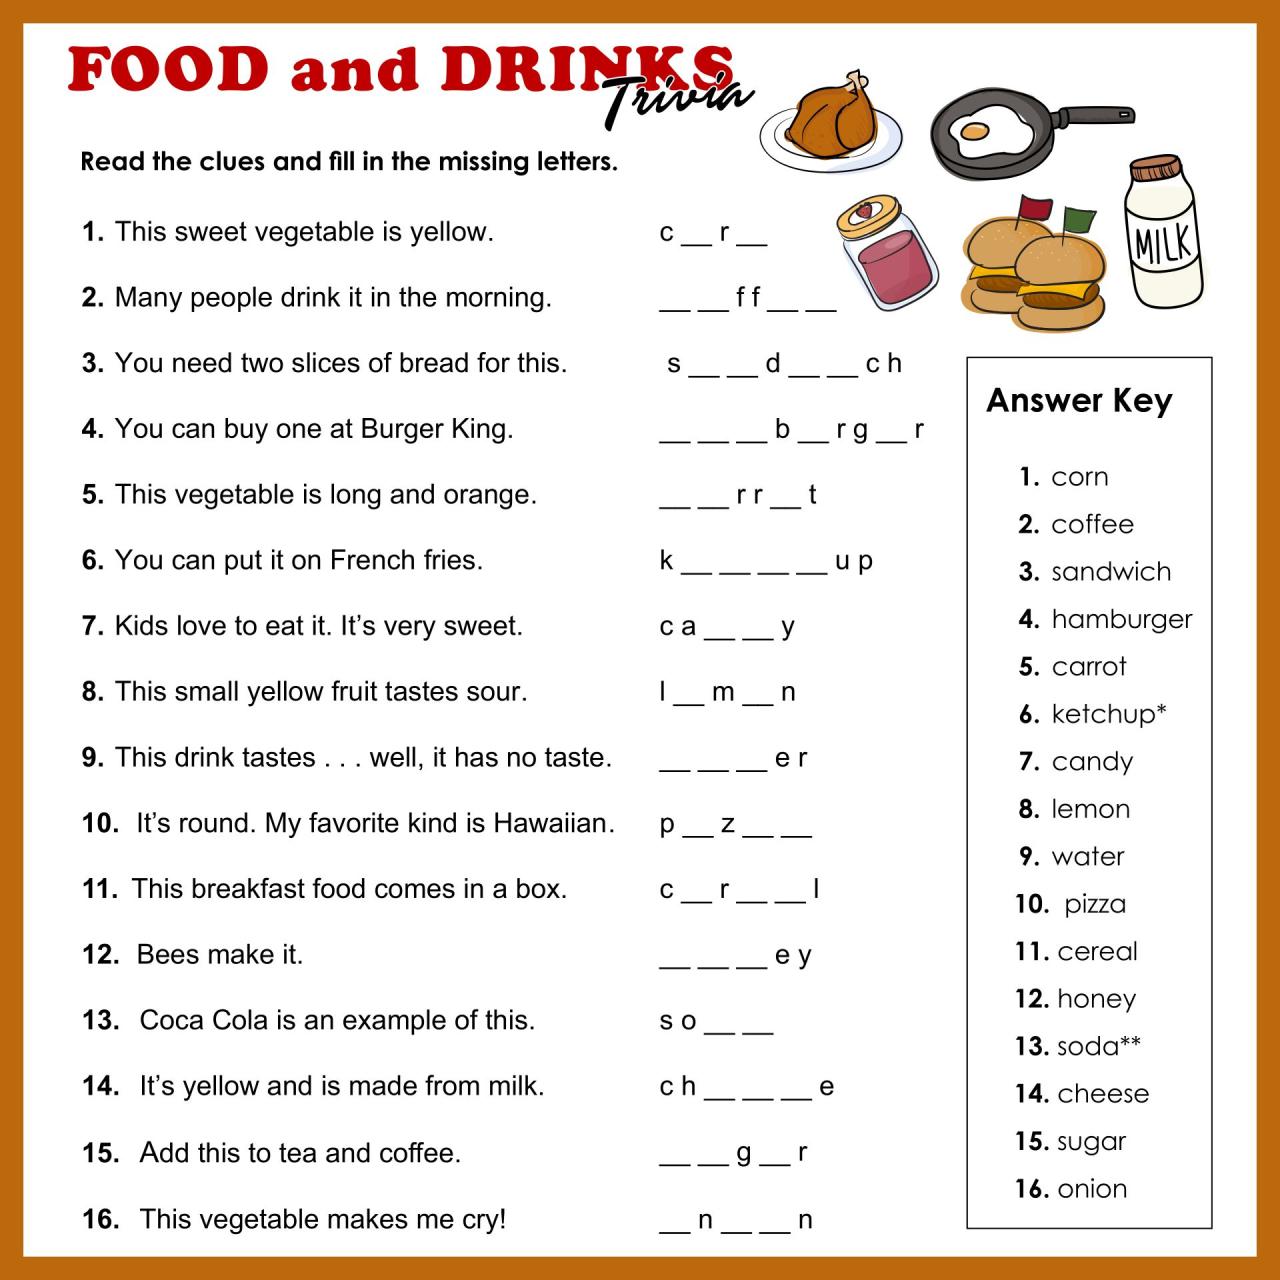 Food and drink trivia questions